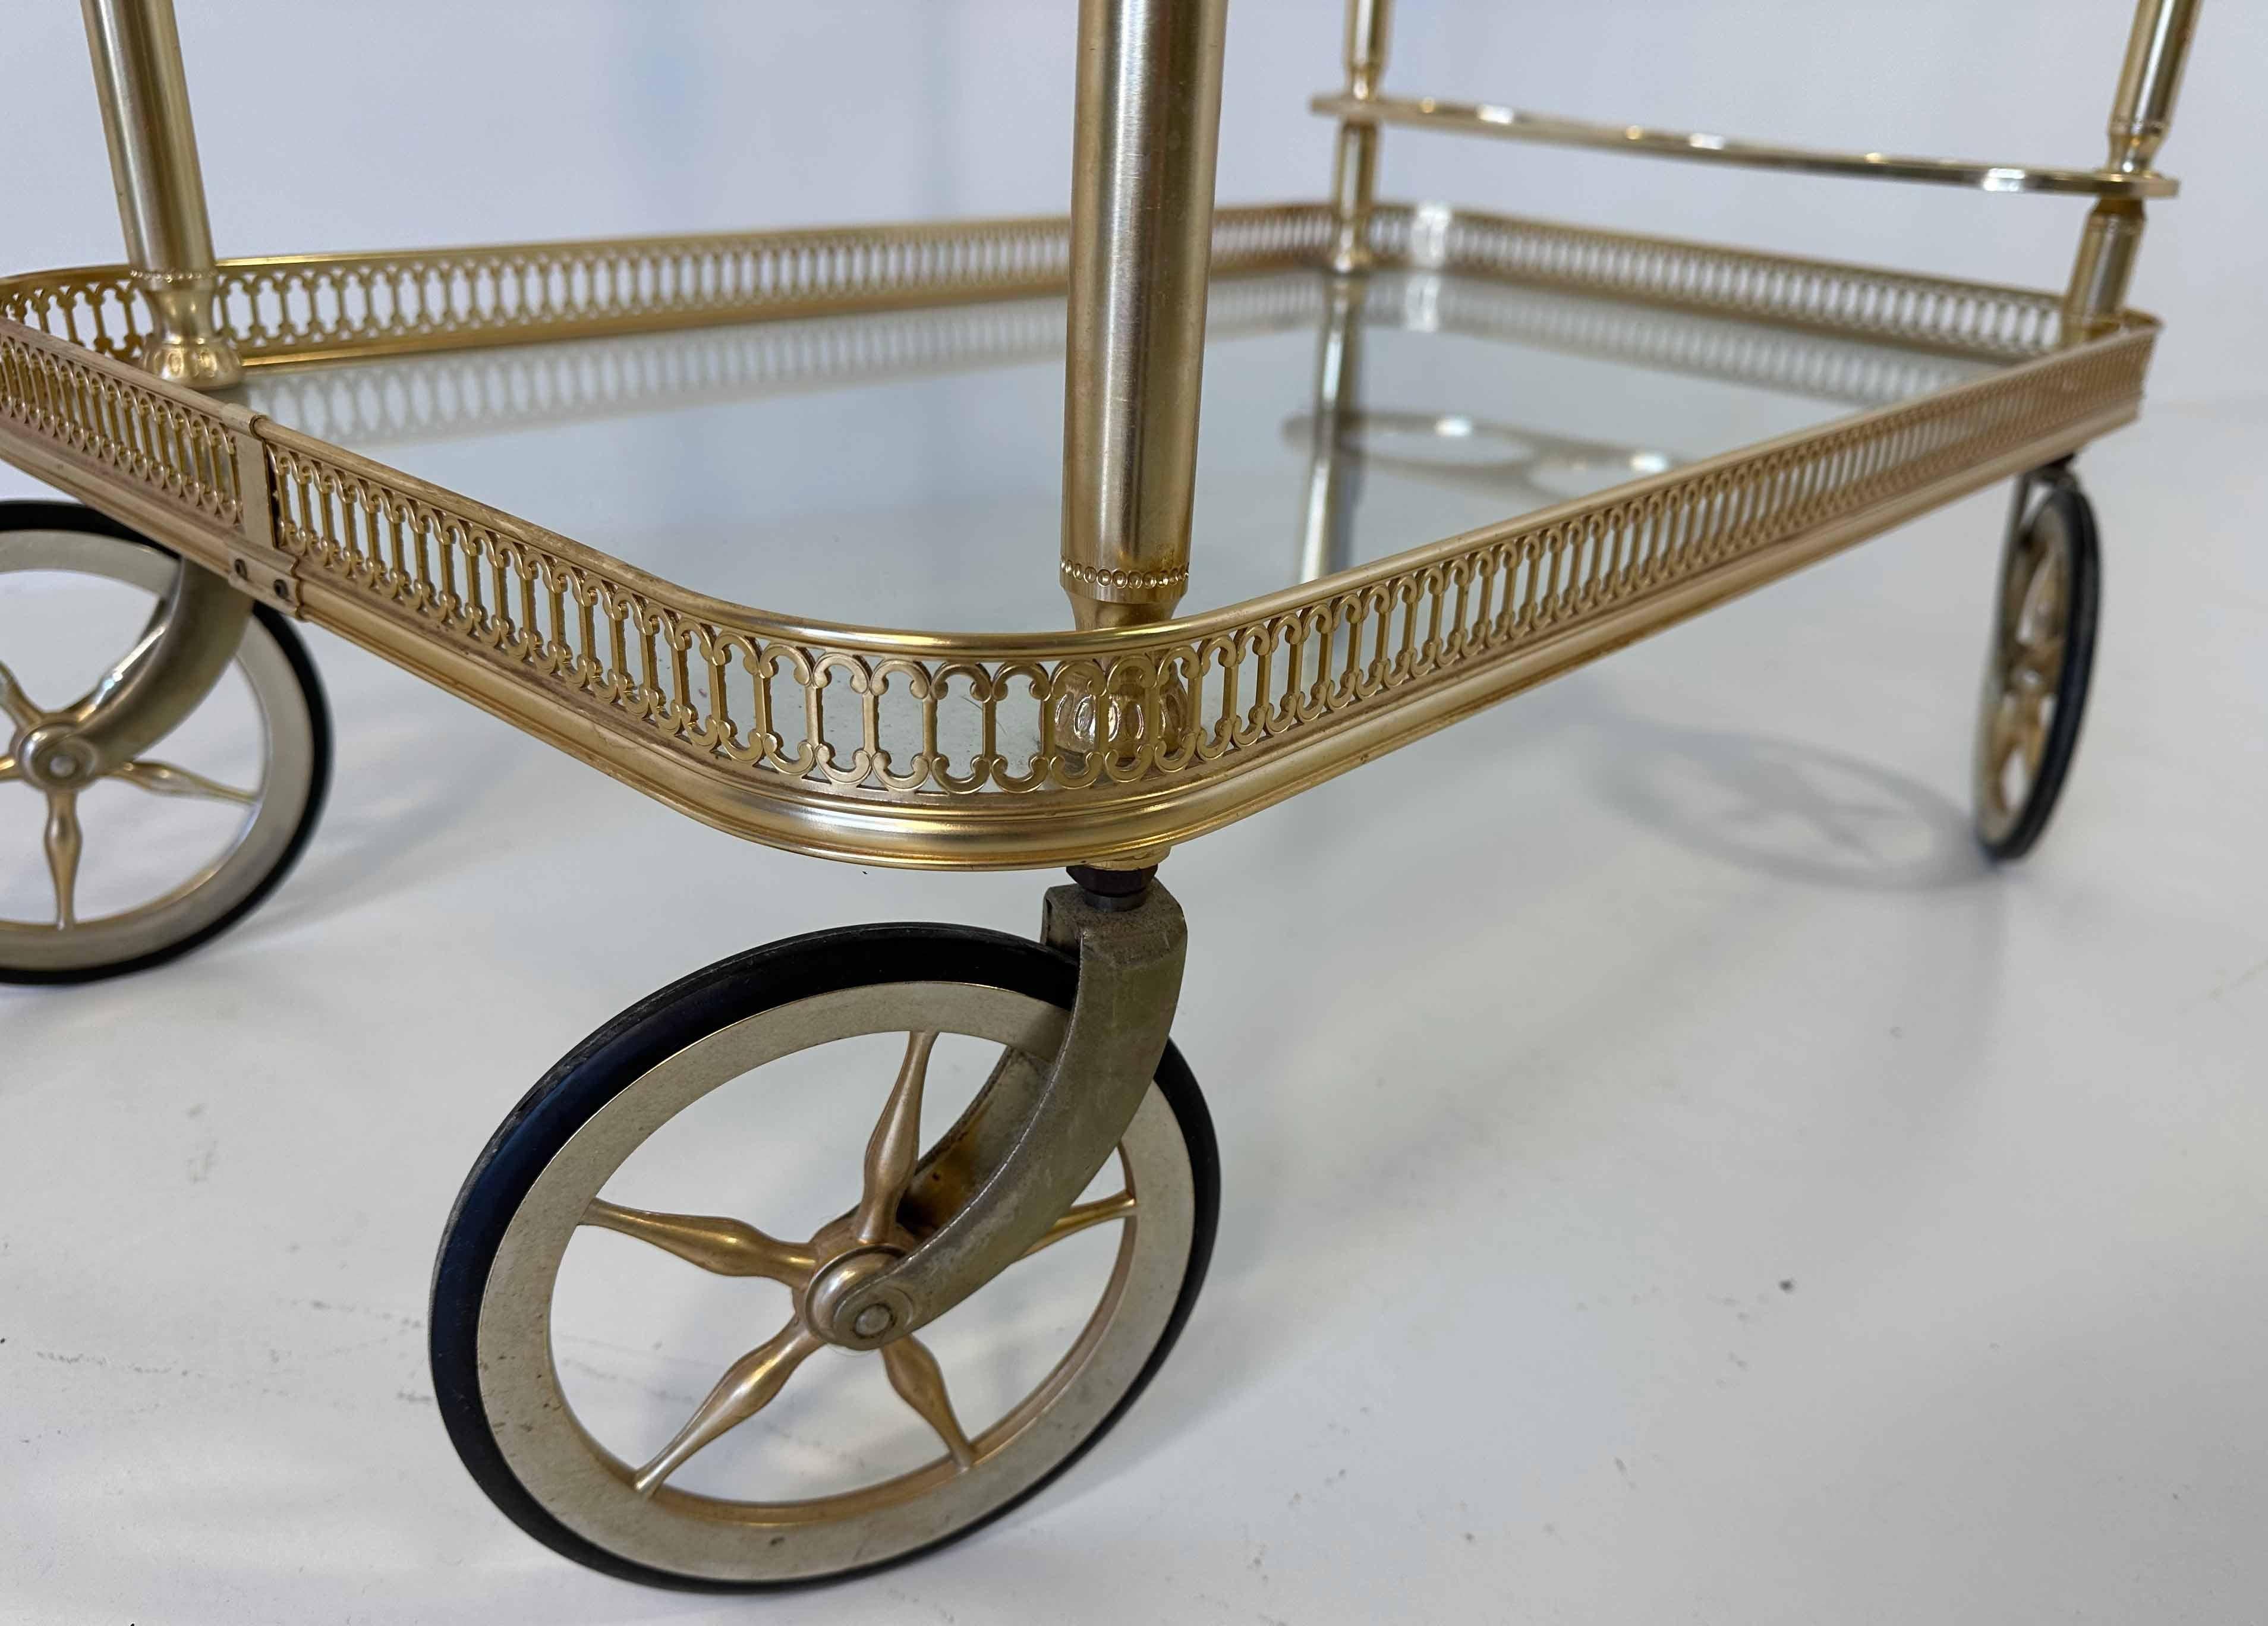 Italian Mid Century Modern Brass and Glass Tray Bart Cart Table by MB, 1970s For Sale 2